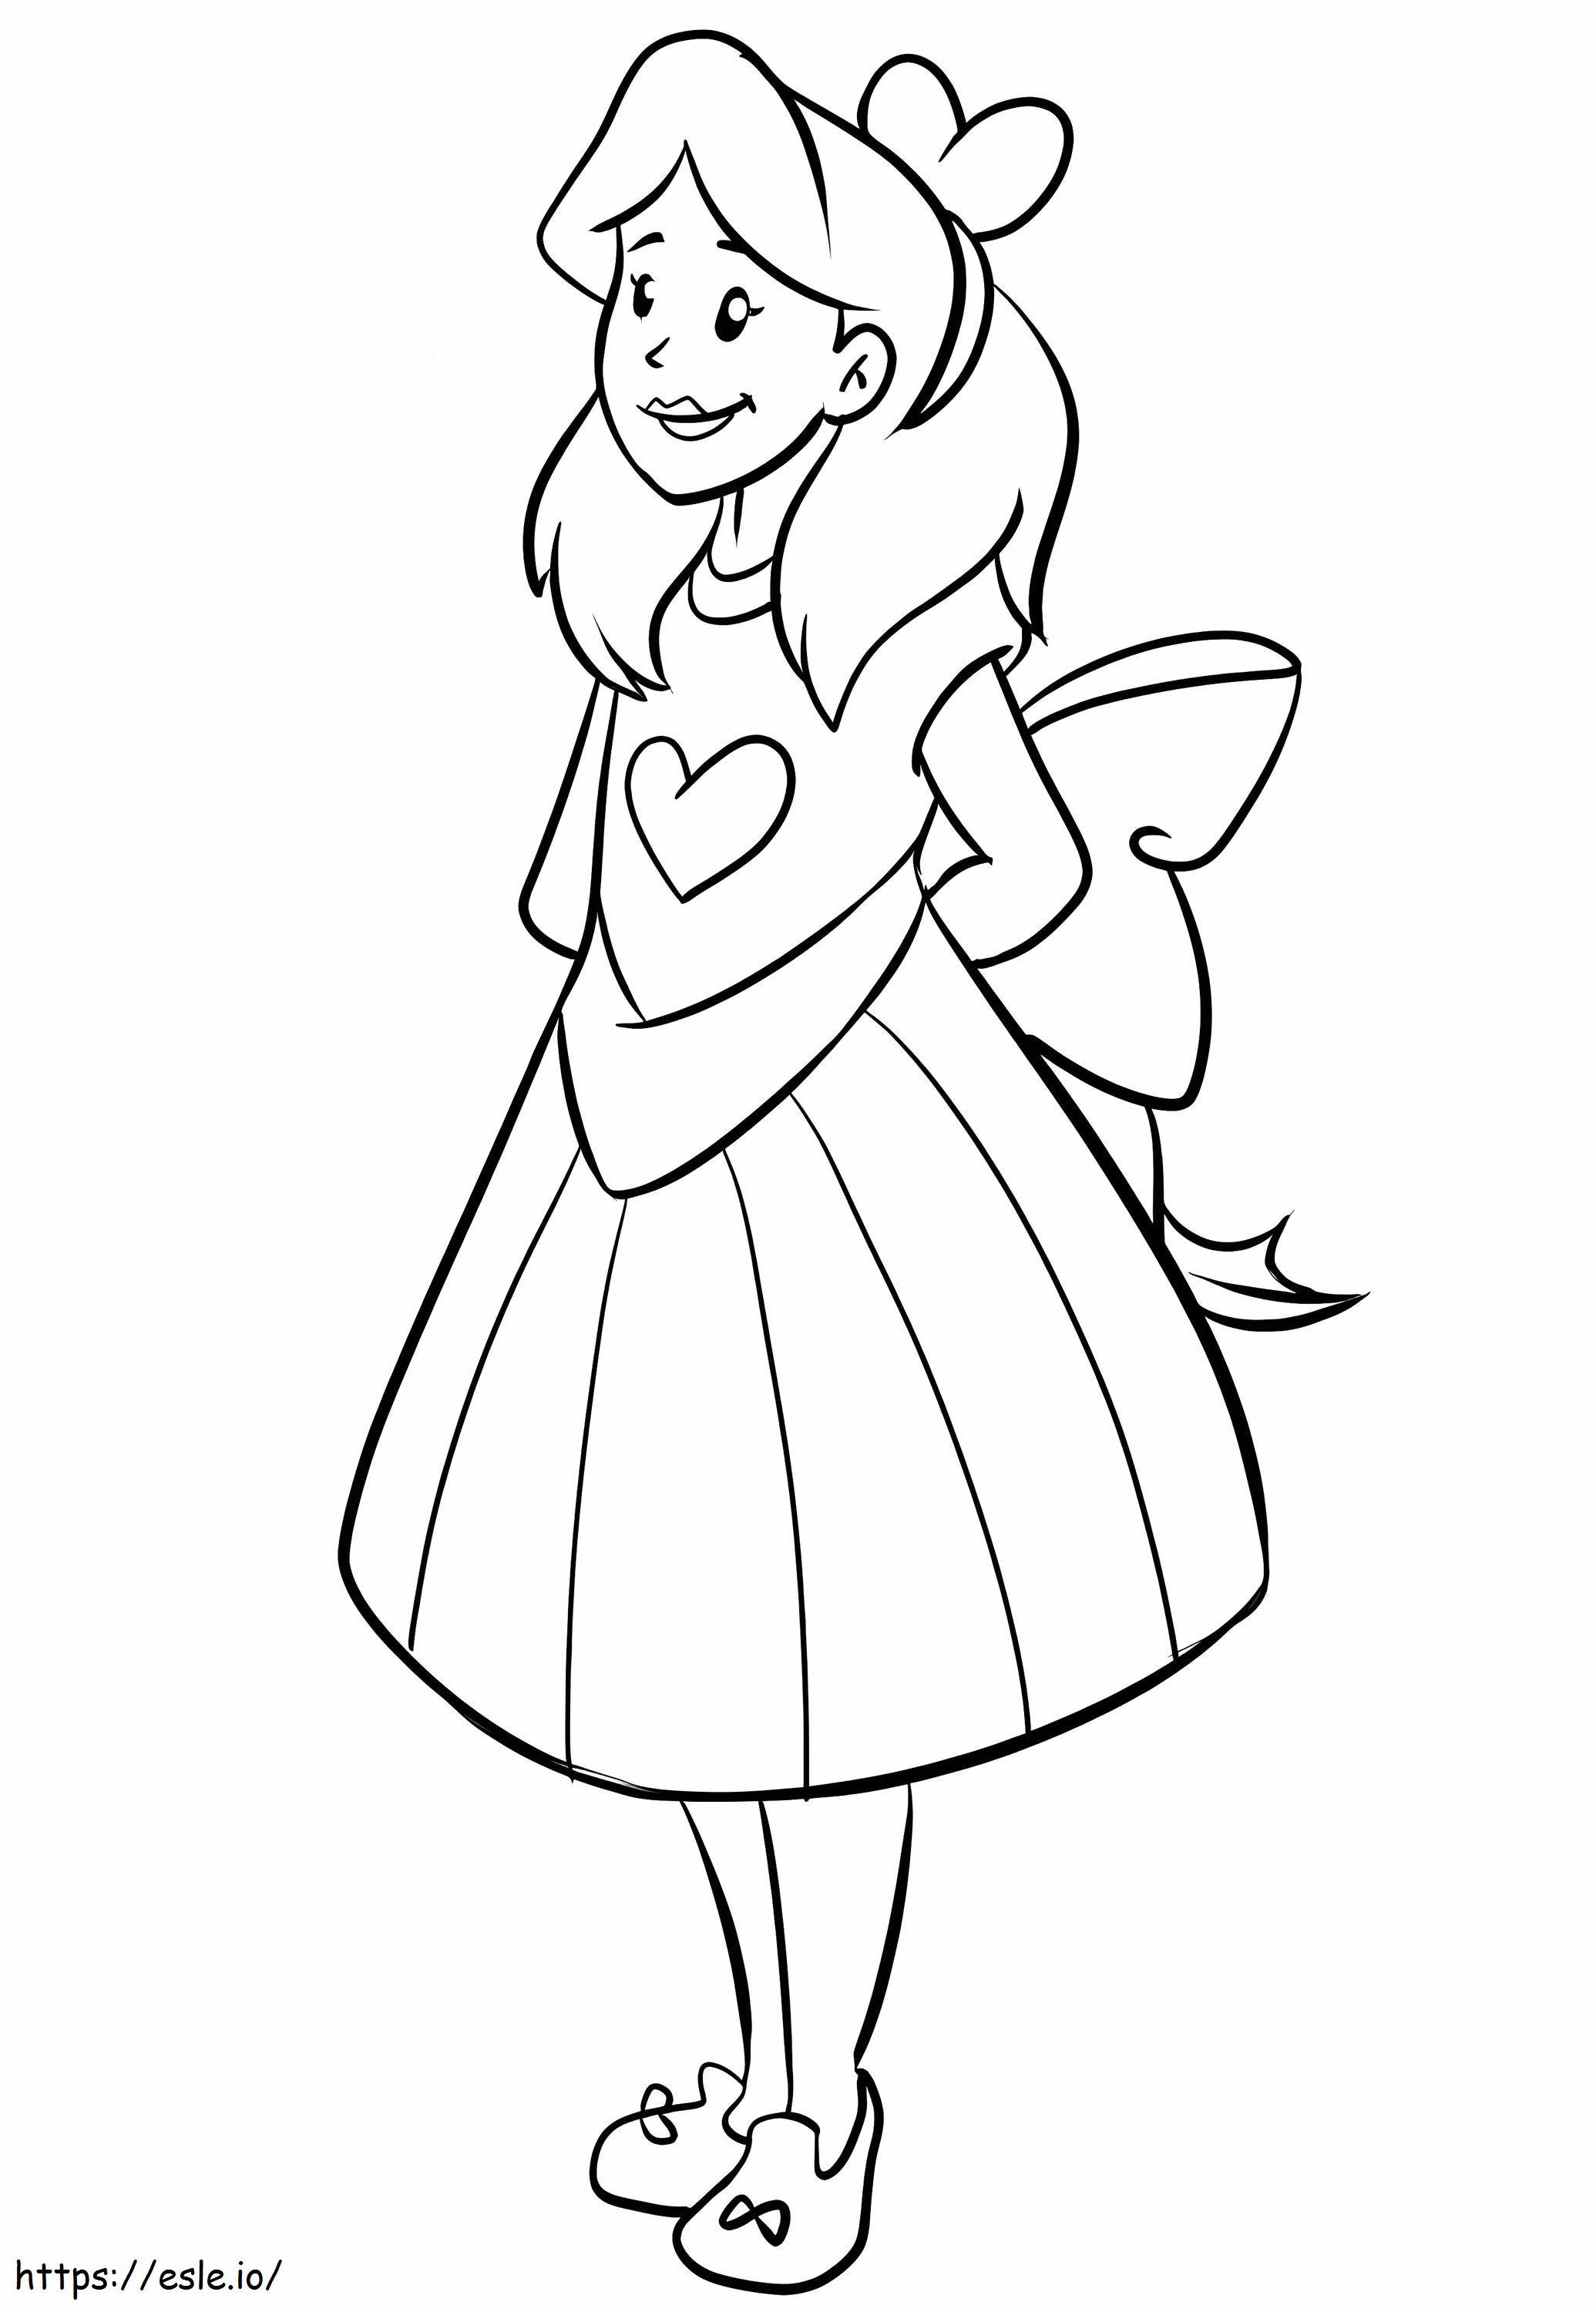 Alice In Wonderland Images coloring page